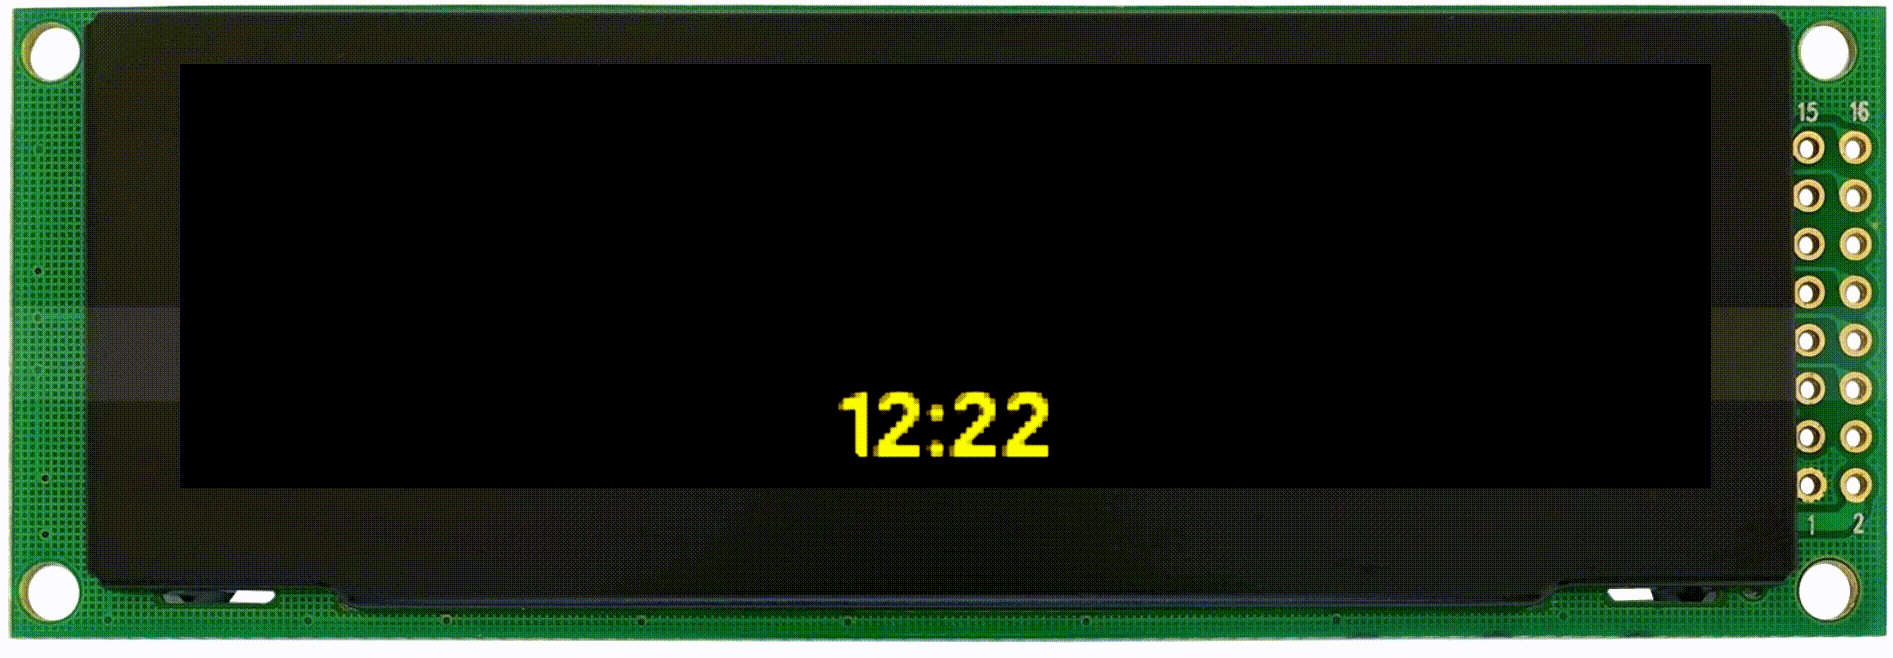 GIF of the miniature departure board operating.